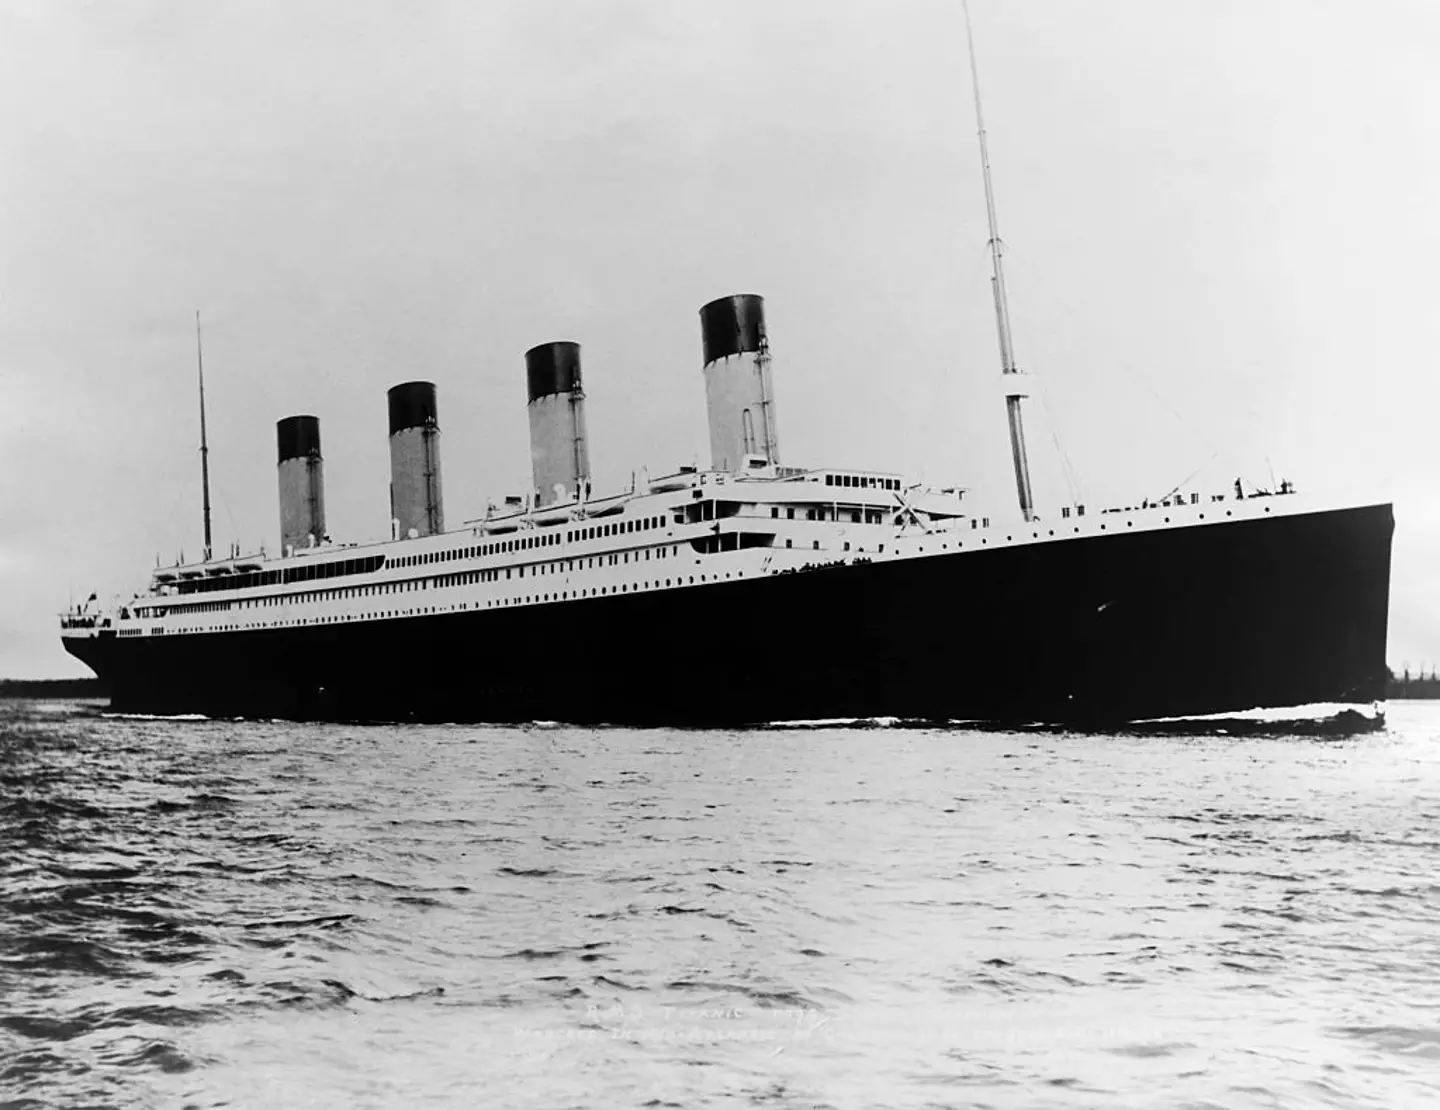 The Titanic was the largest ship disaster of its time. (George Rinhart/Corbis via Getty Images)